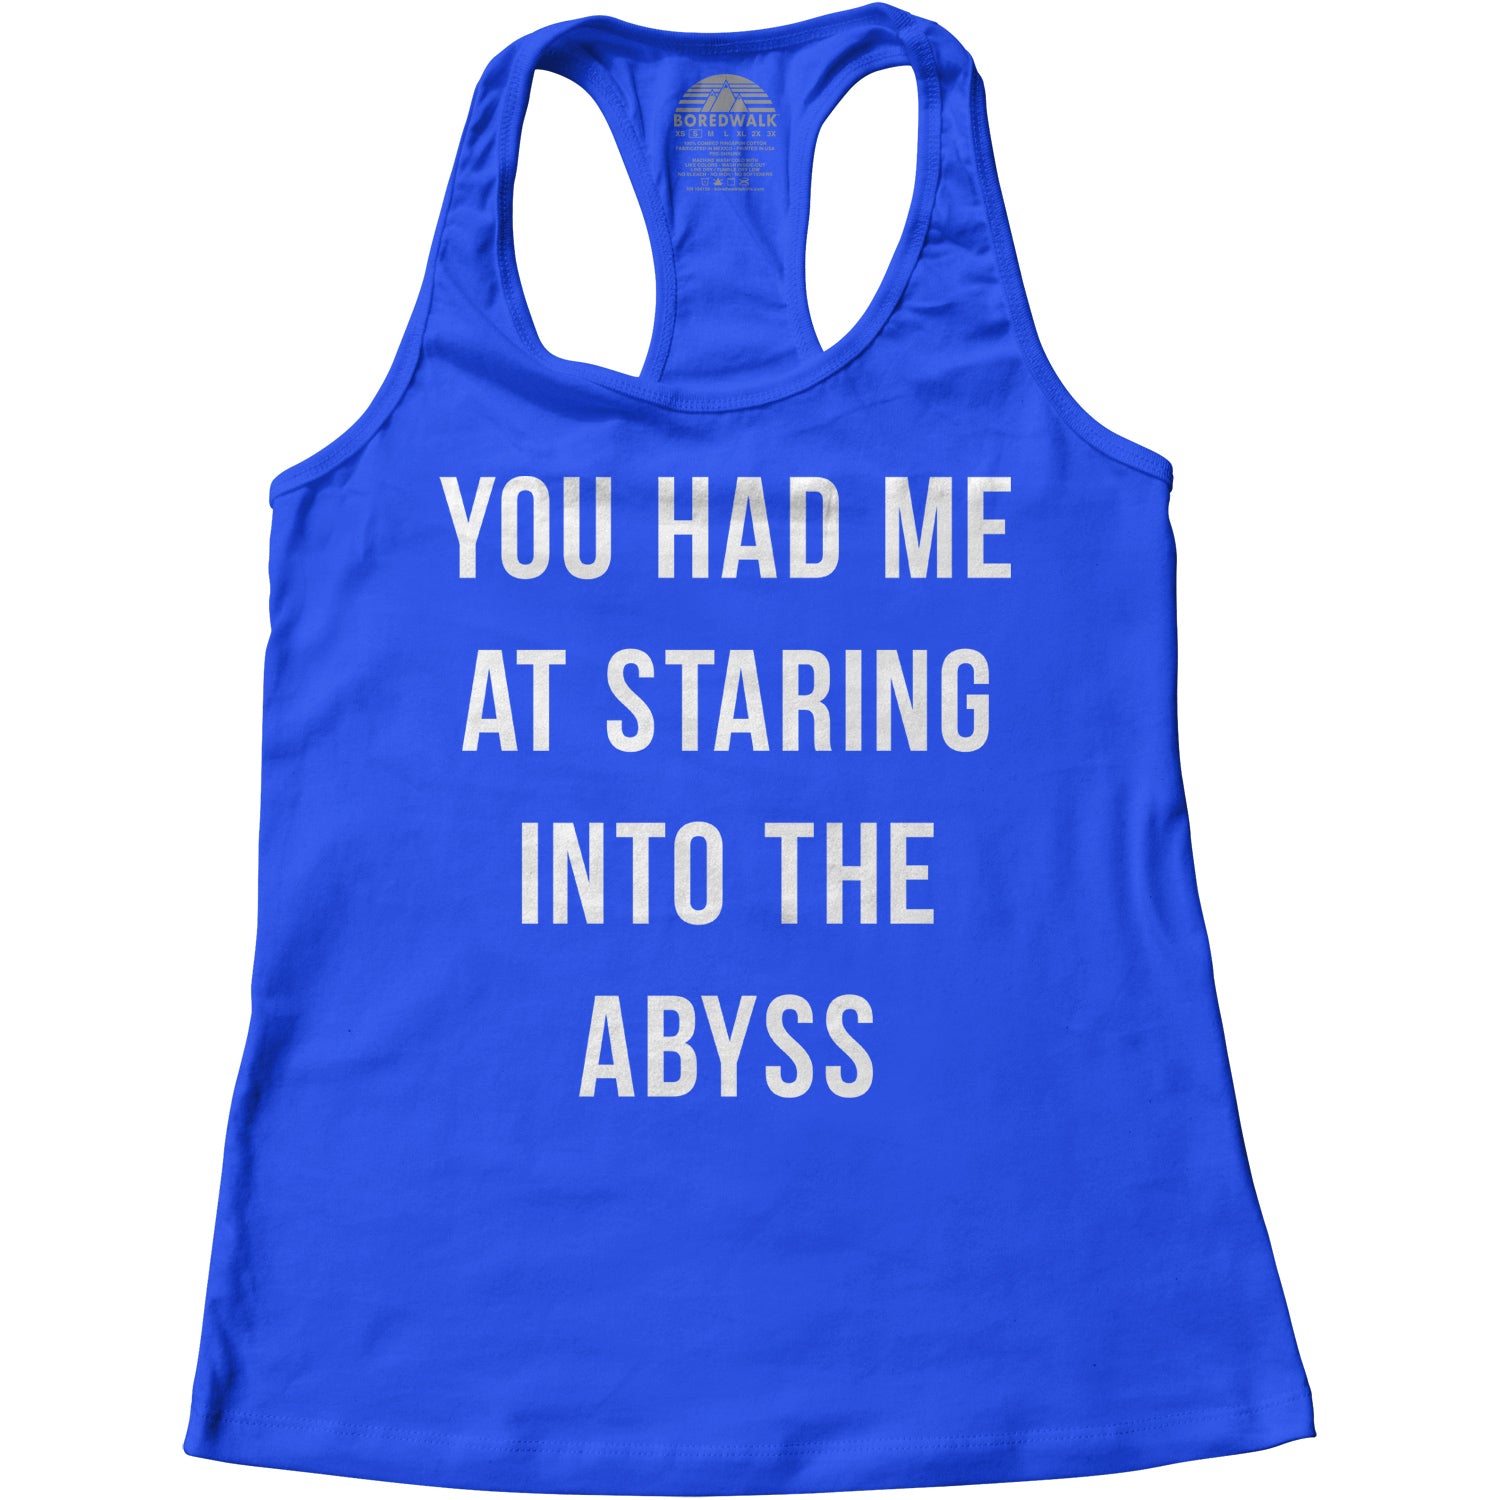 Women's You Had Me at Staring Into the Abyss Racerback Tank Top